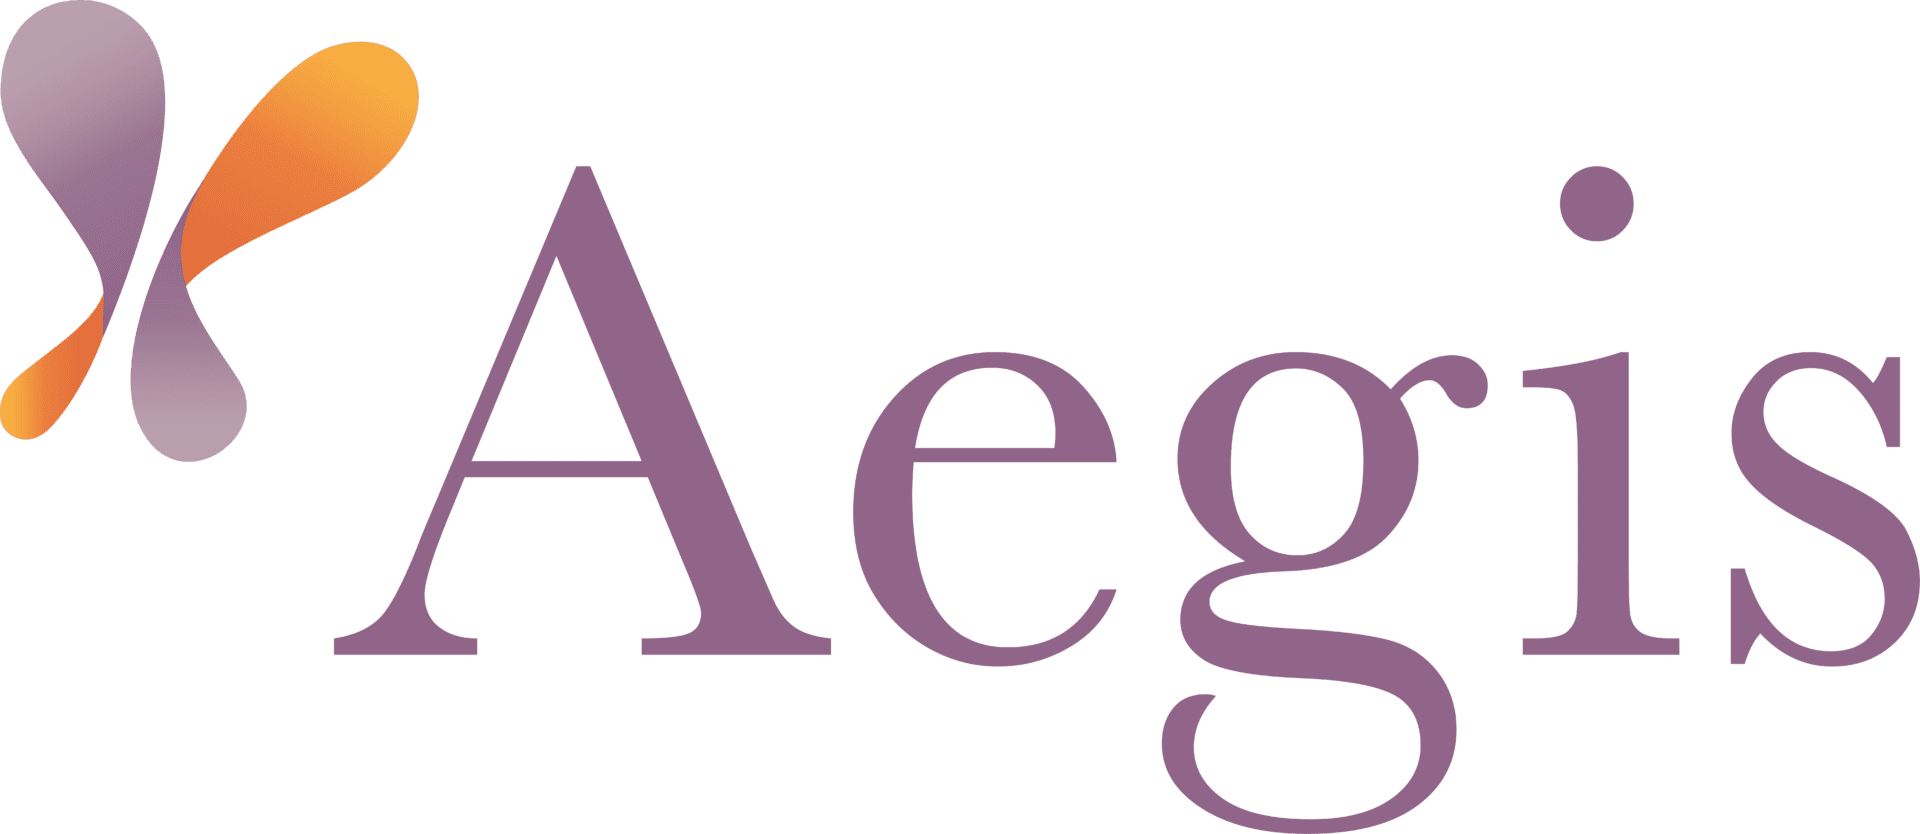 Aegis | Premier Provider Of Homecare And Hospice Services